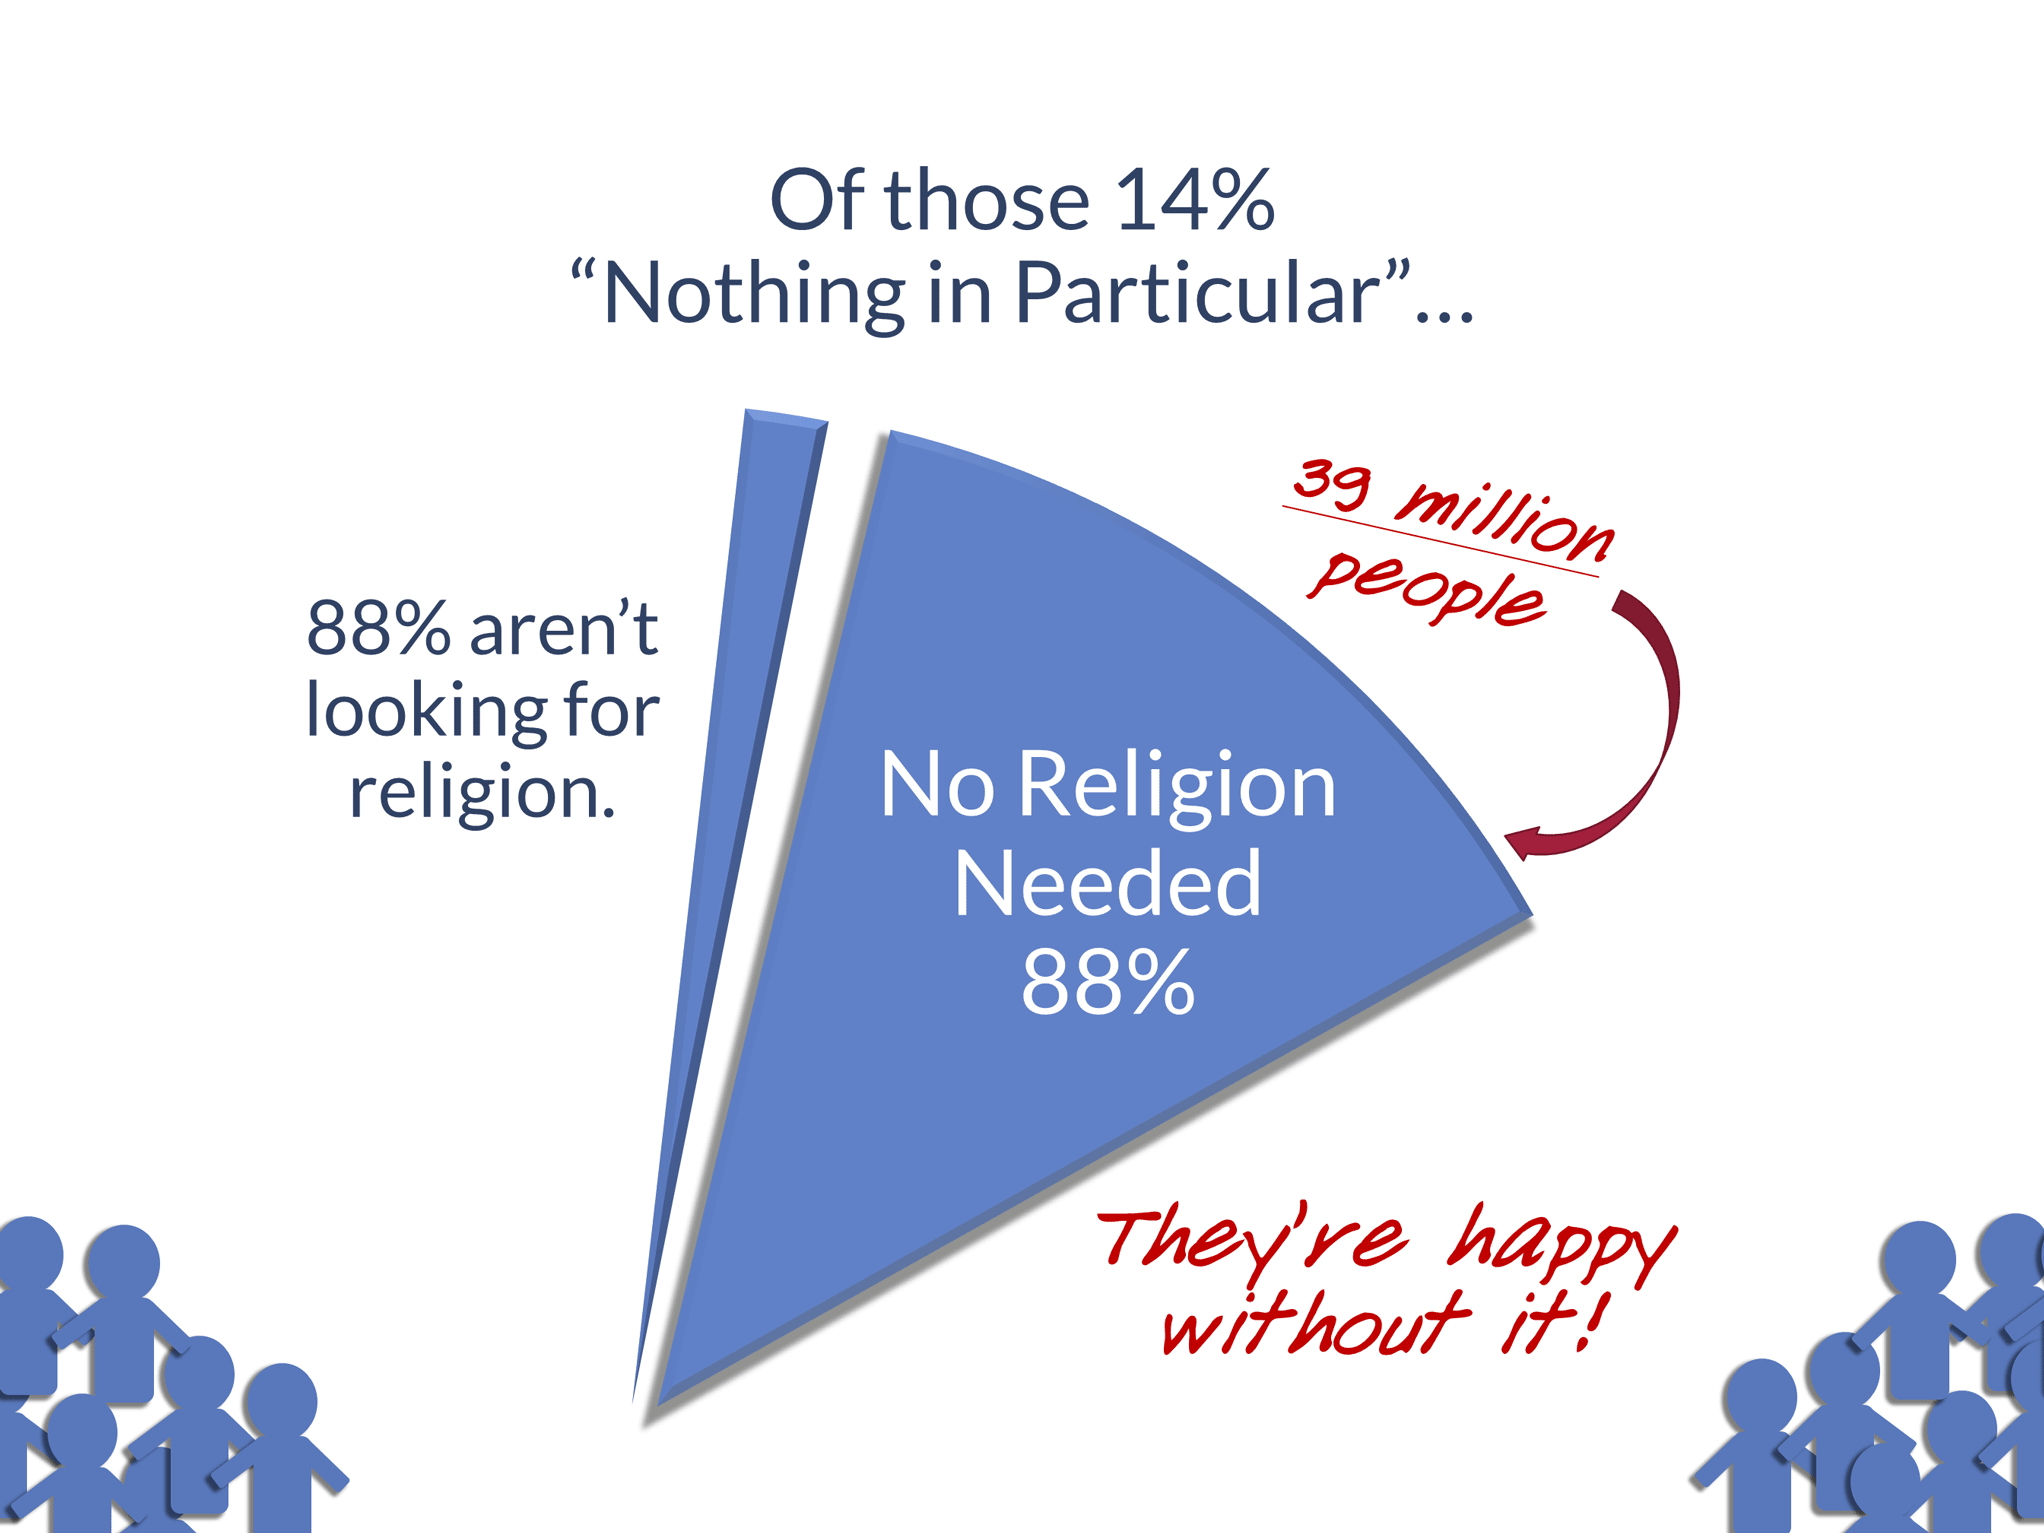 Of those 14% 'Nothing in Particular', 88% aren't looking for religion. (39 million people. They're happy without it!)